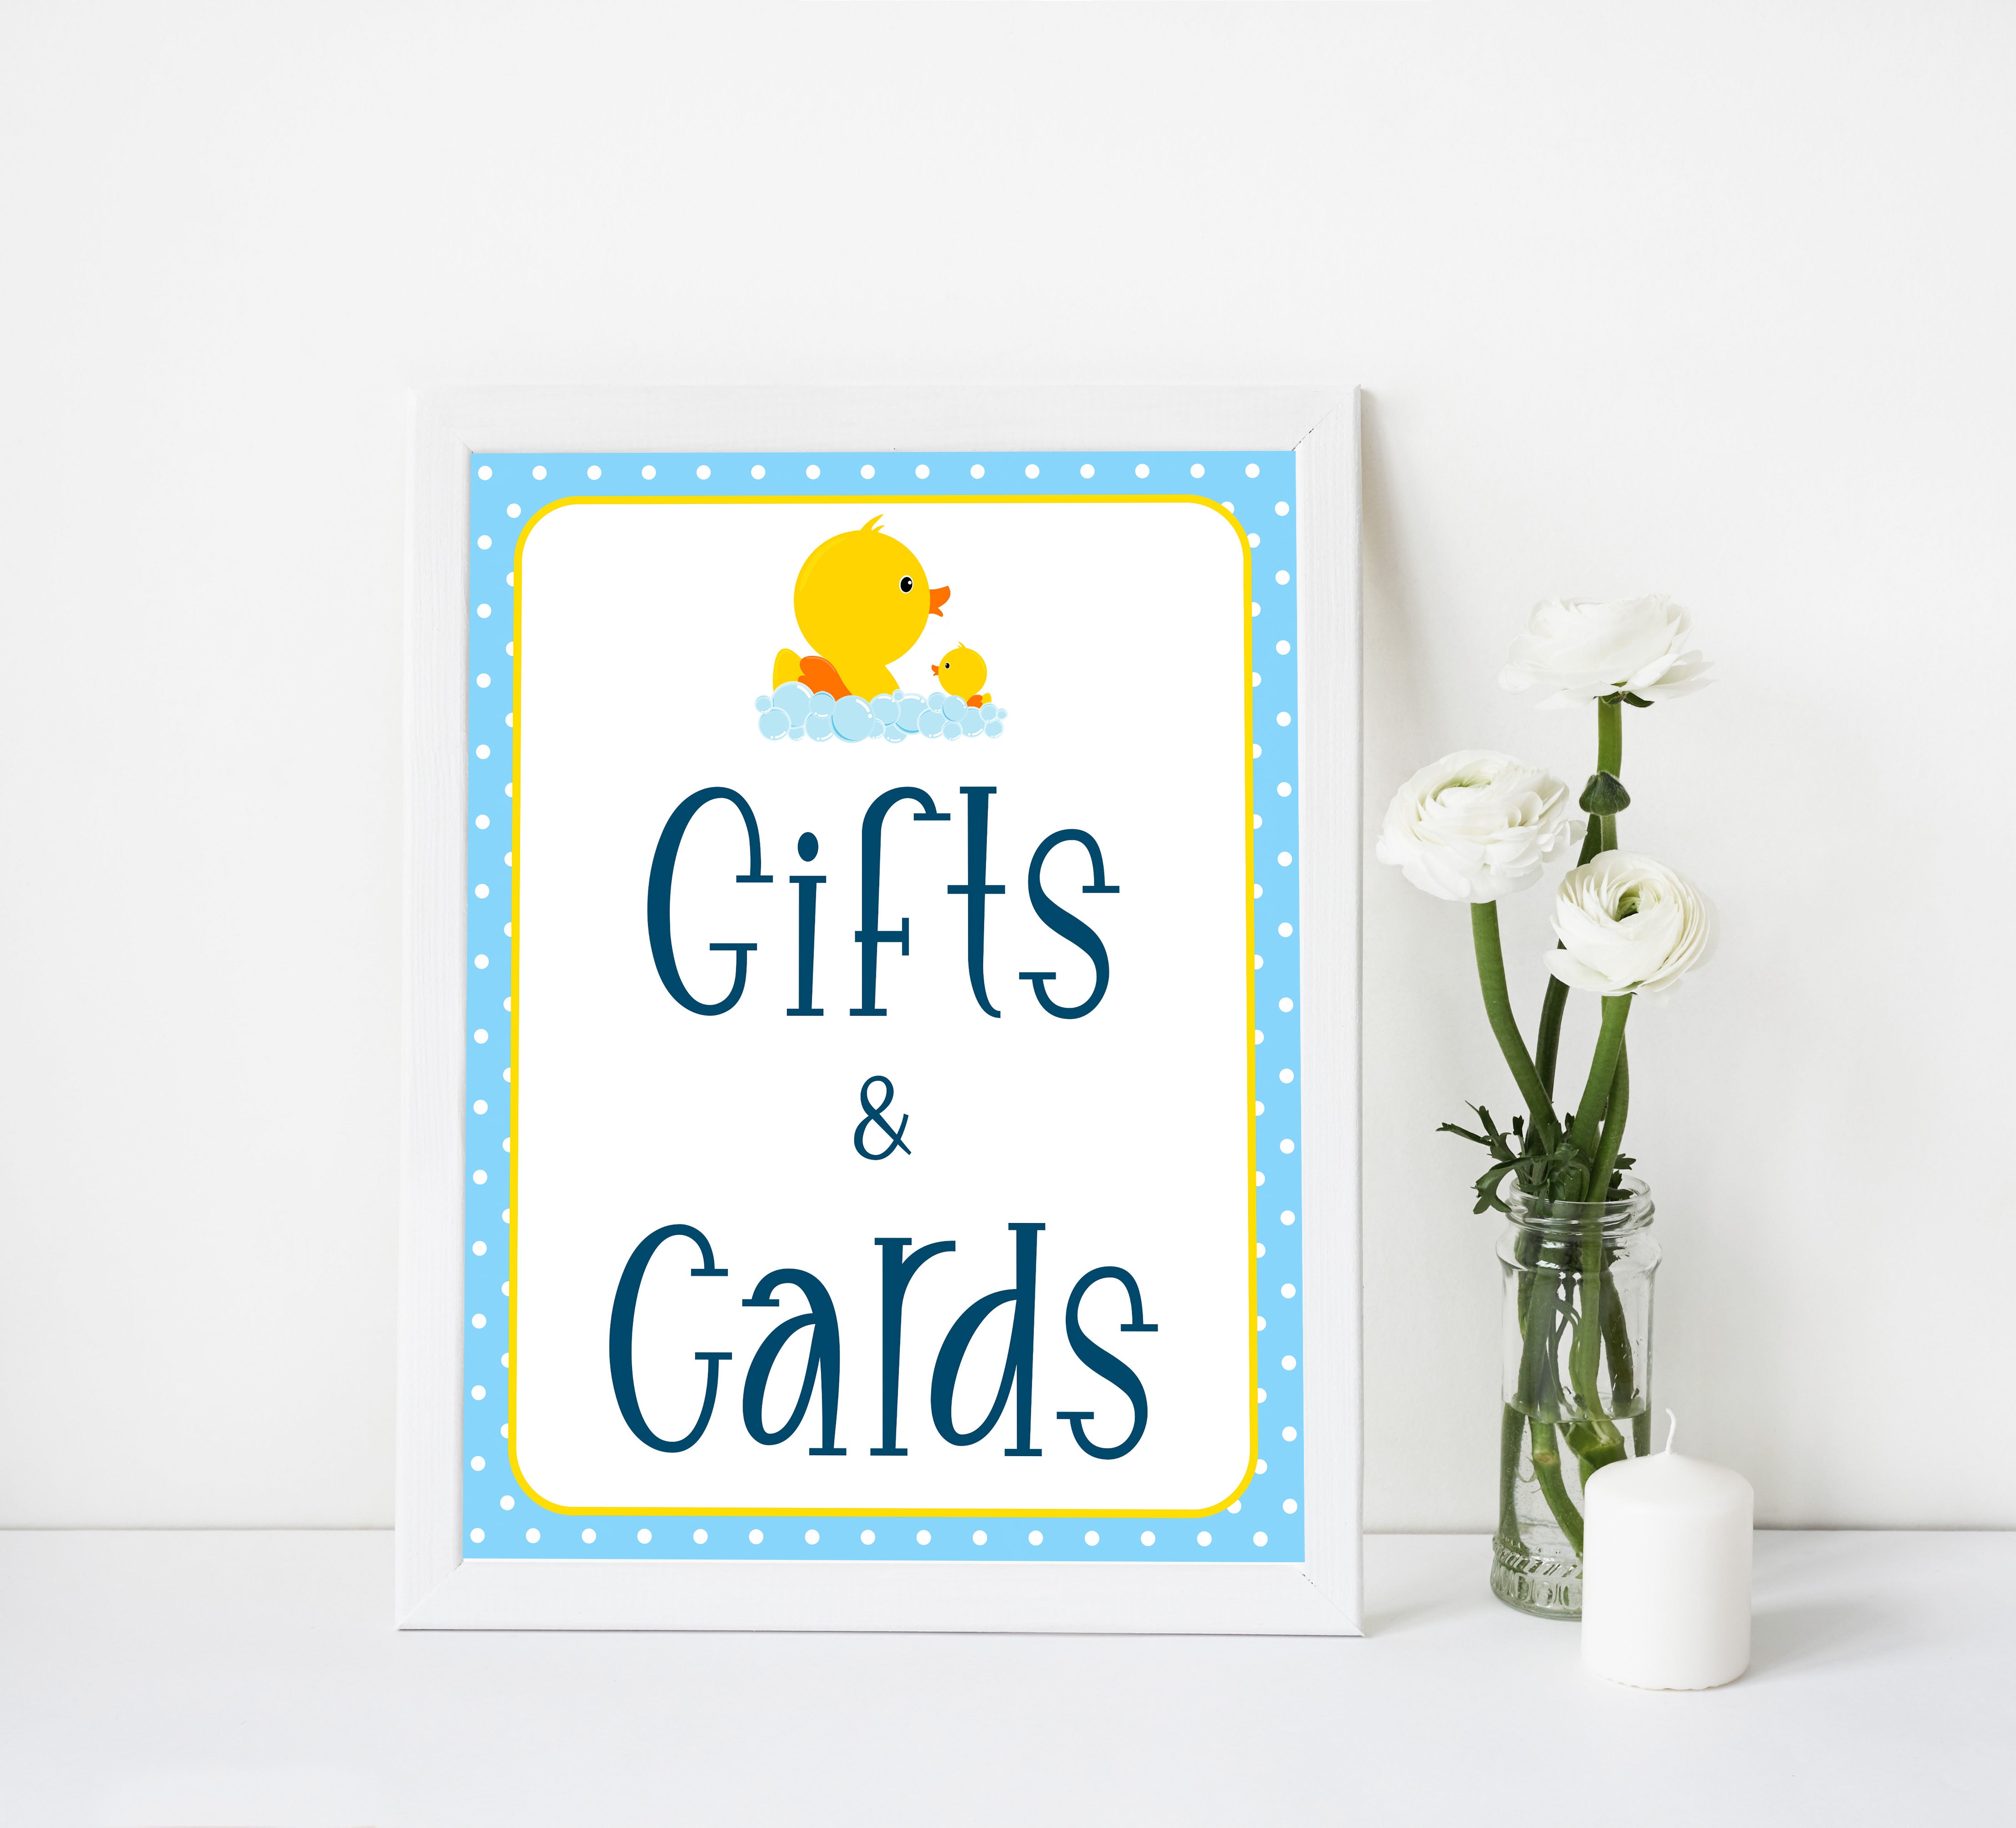 rubber ducky baby signs, gifts and cards baby signs, printable baby signs, baby decor, fun baby decor, rubber ducky